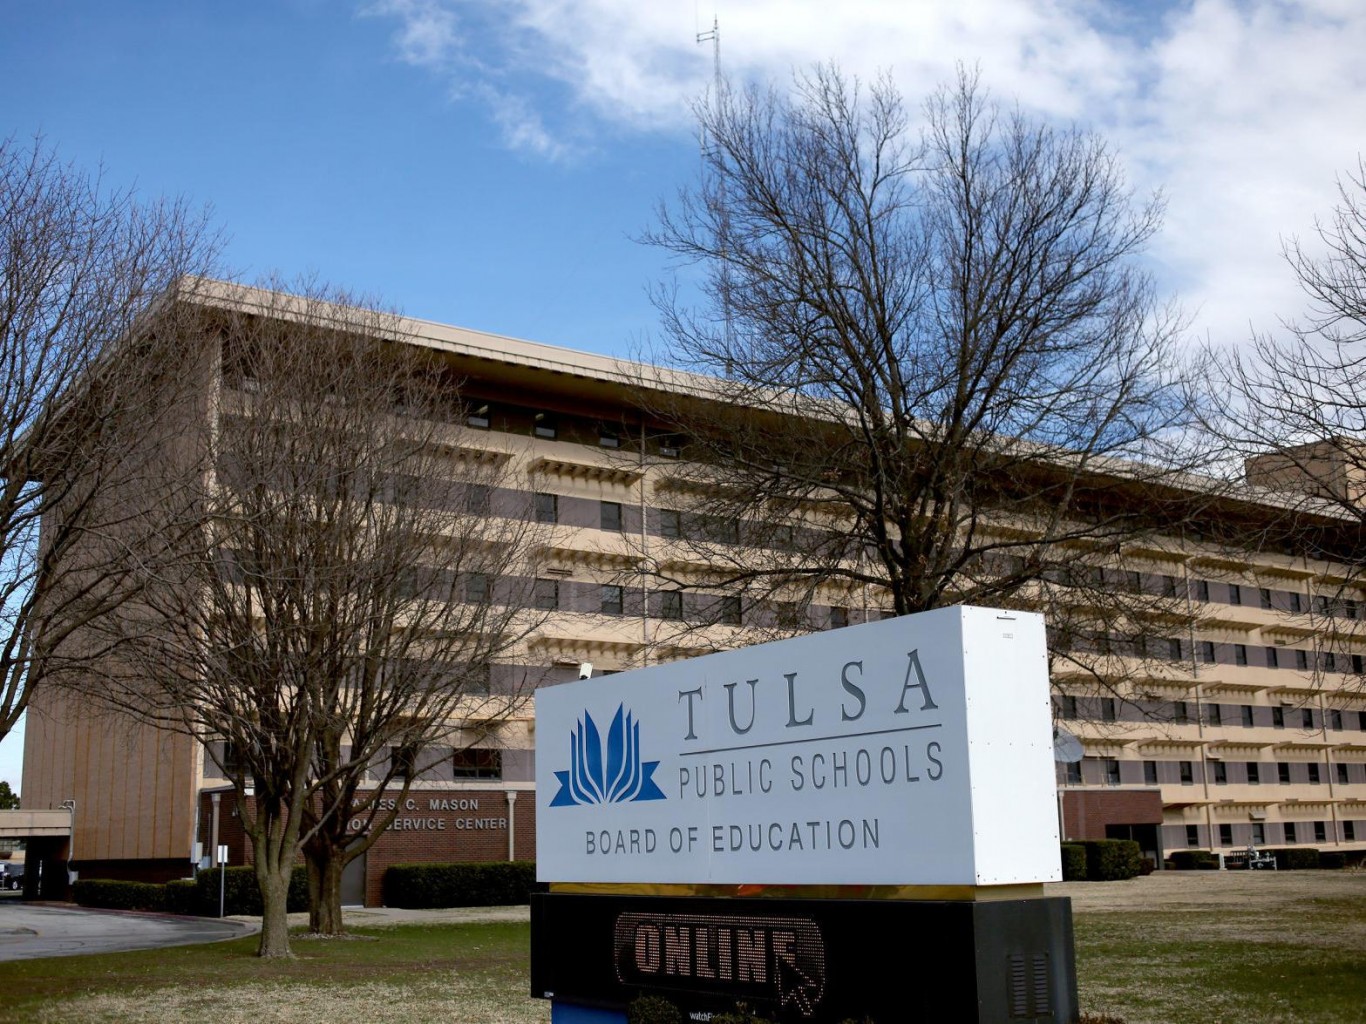 Former Members of the Tulsa Public Schools Board of Education appealed Current Board of Trustees focus on students